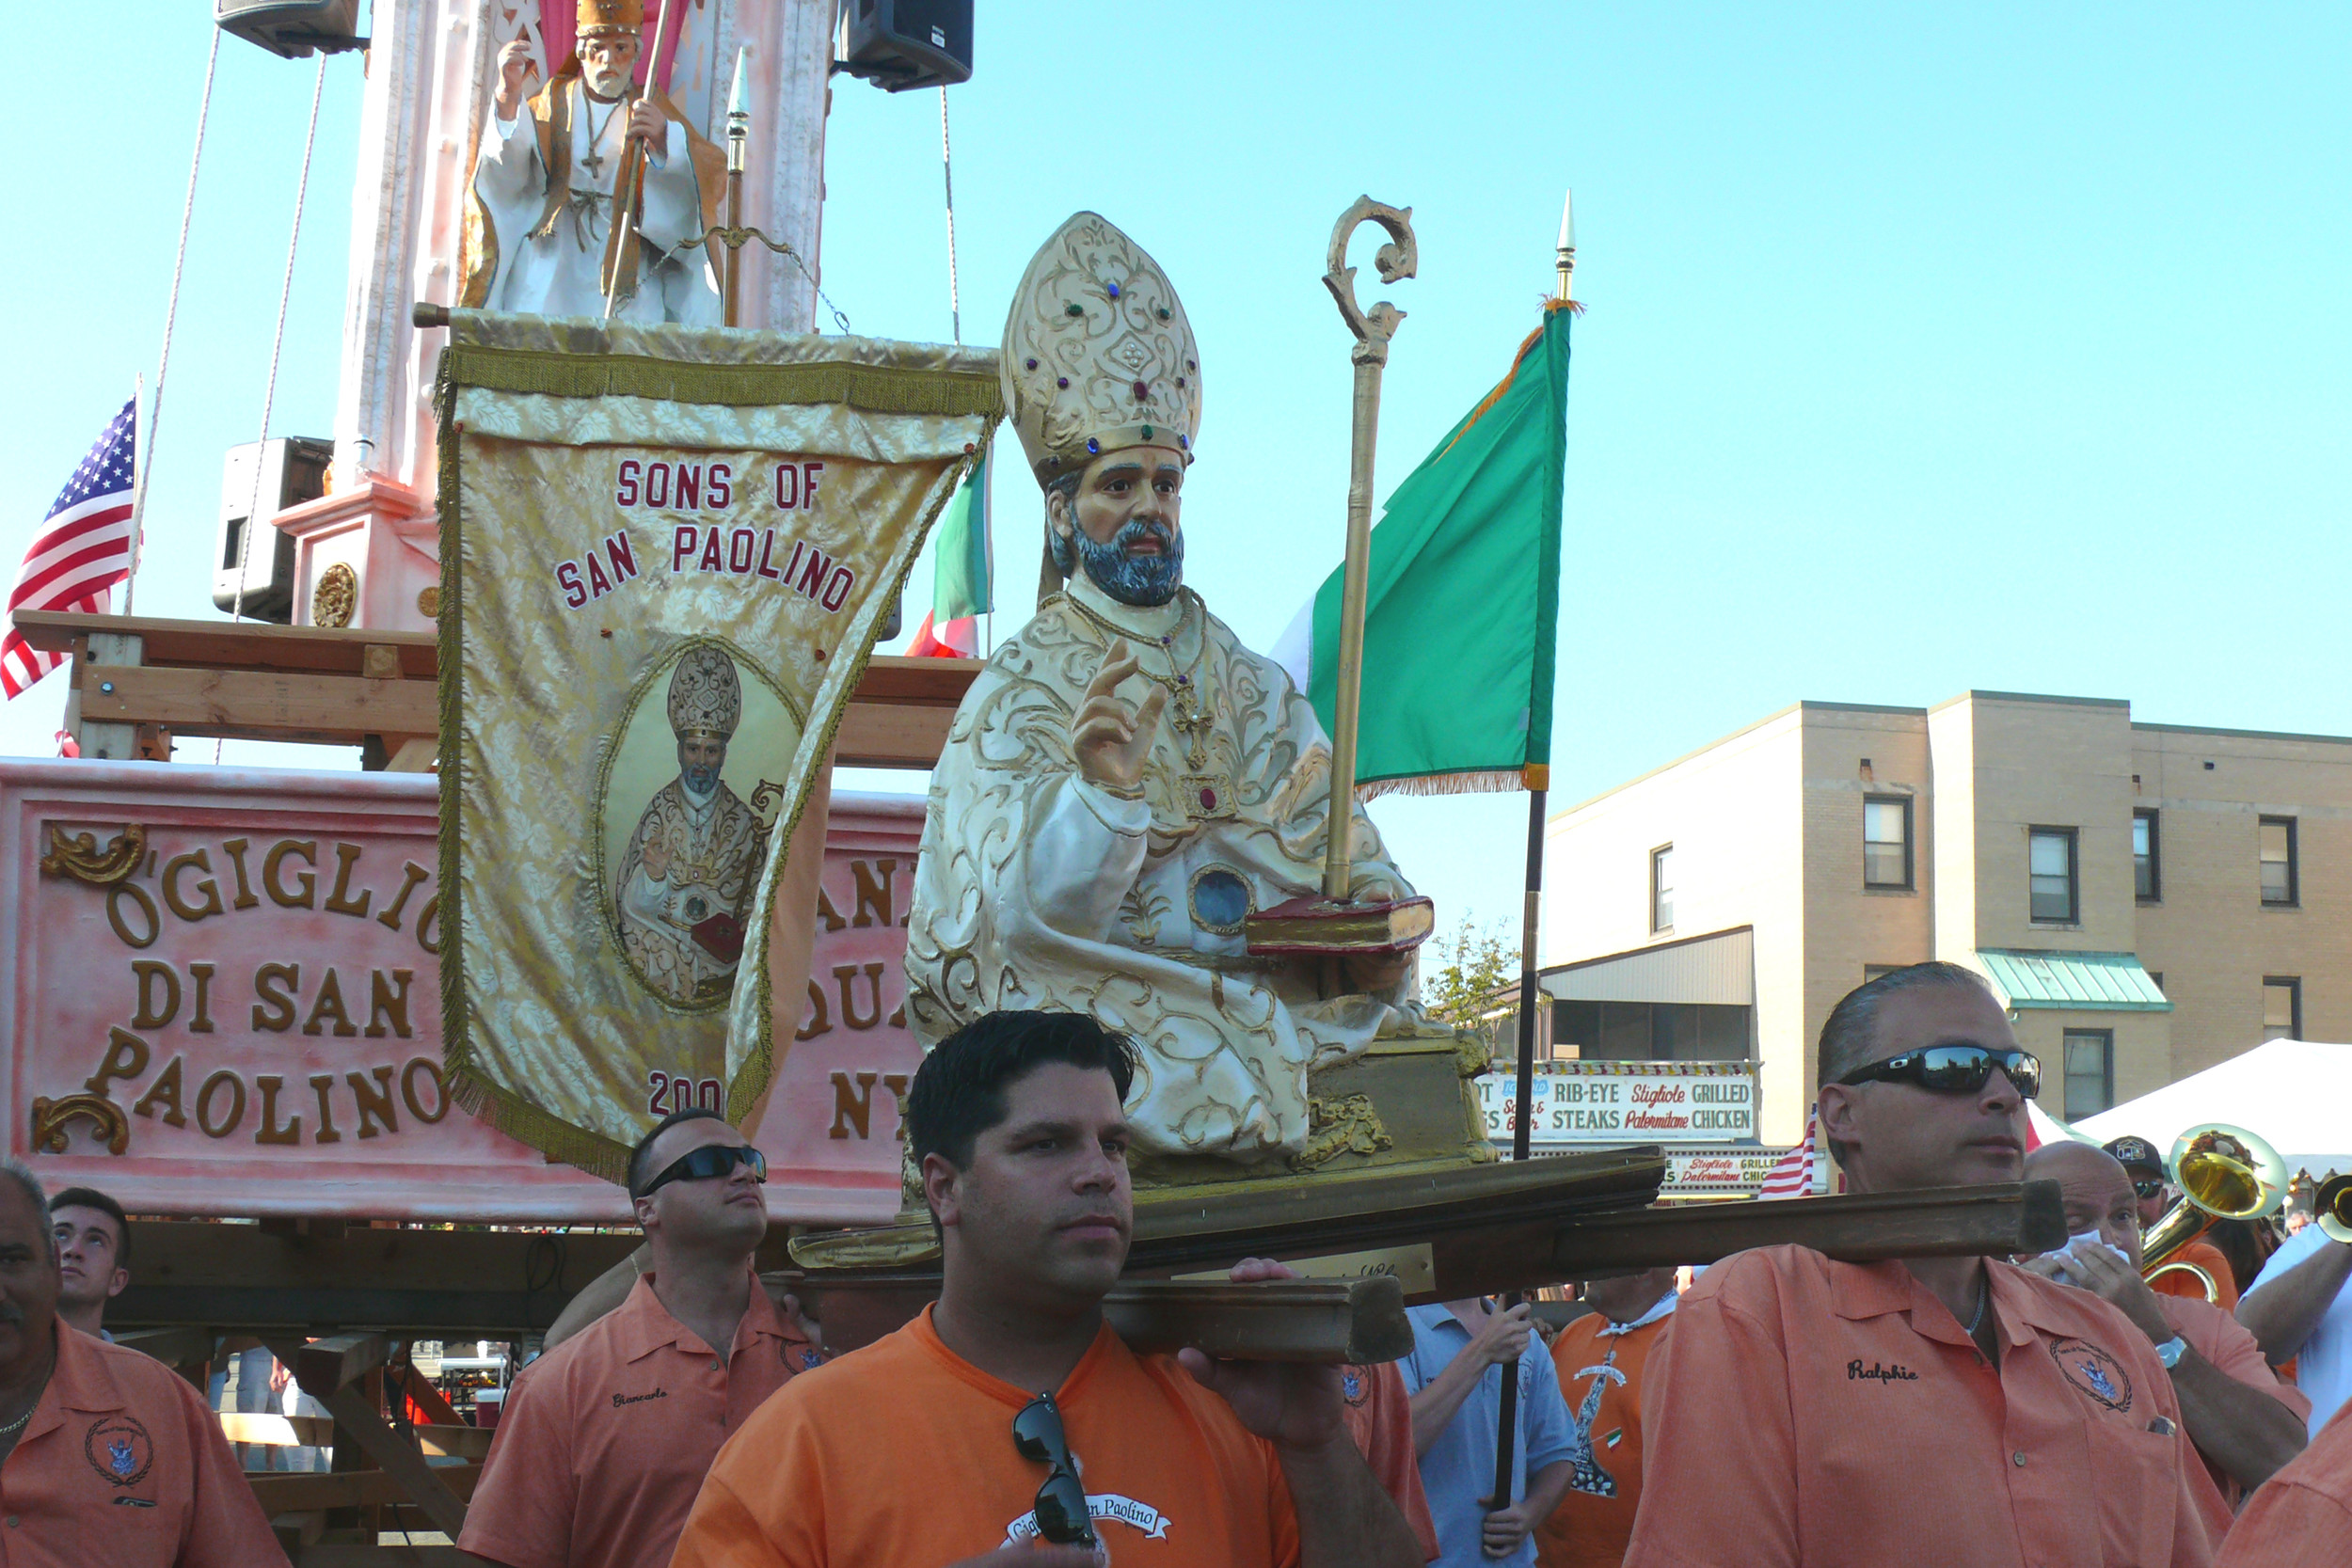 The statue  attached to the Giglio to start the festival.